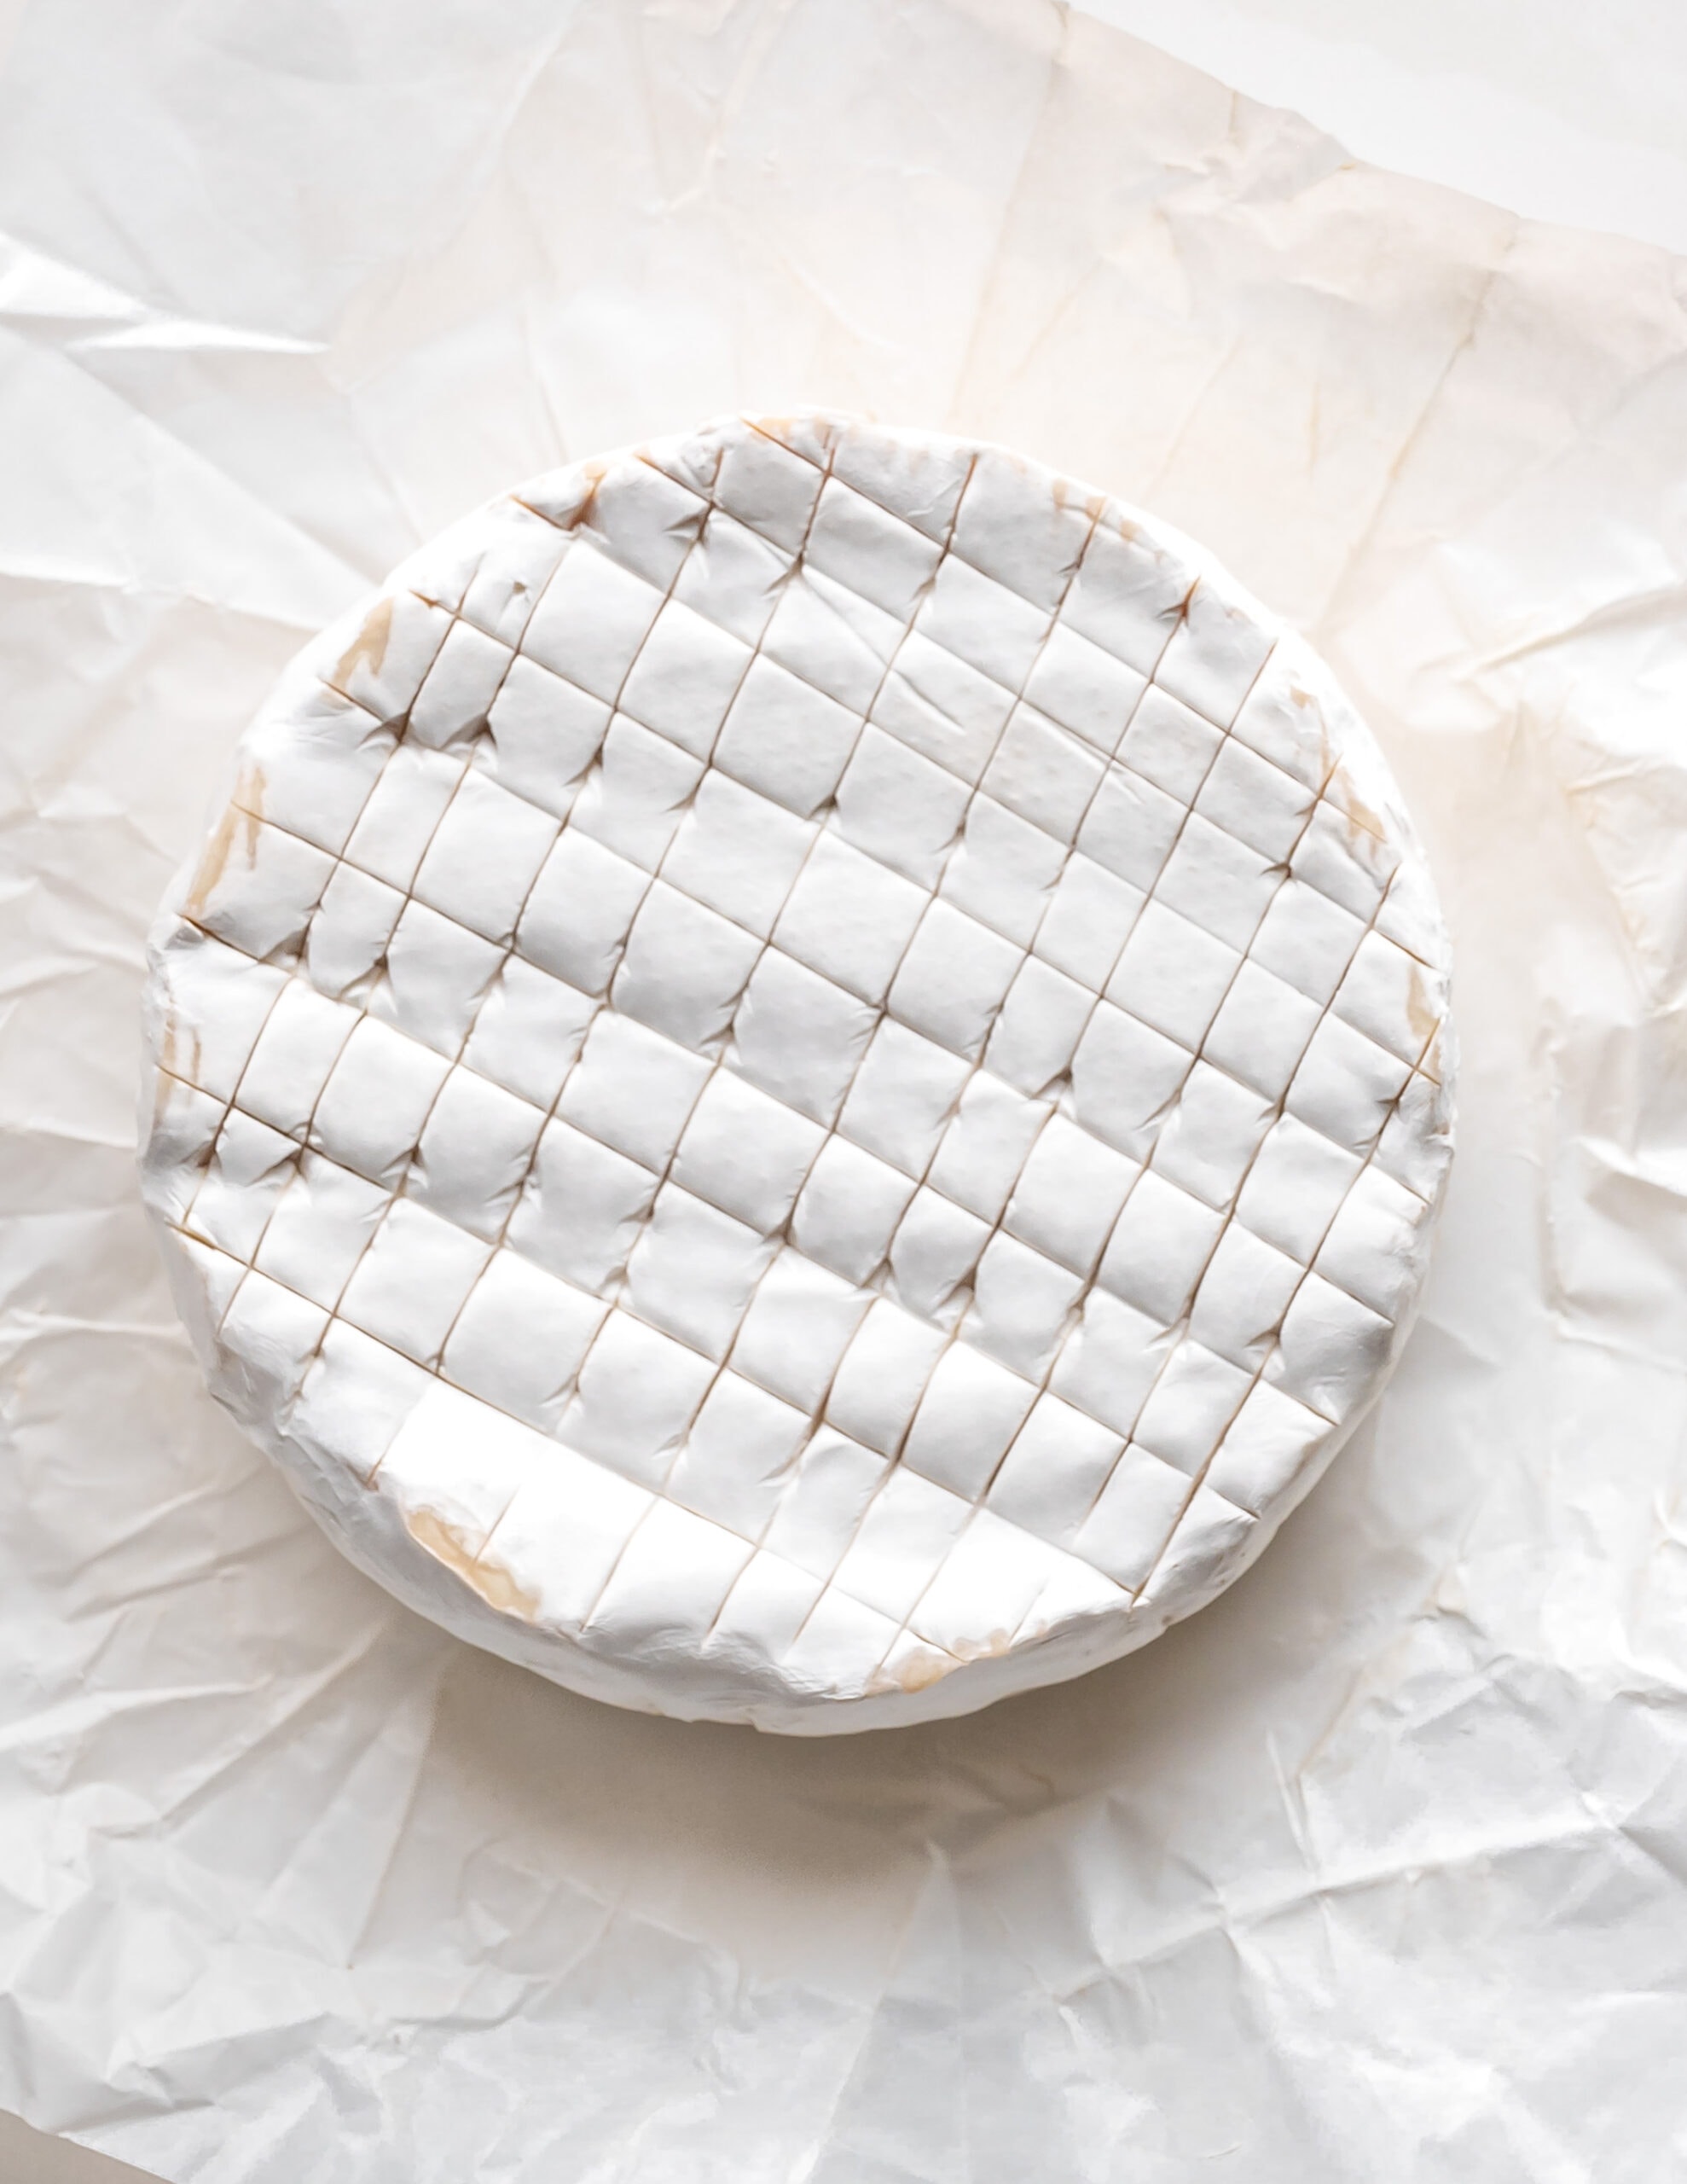 A picture of a round wheel of brie, with a crosshatch design. 